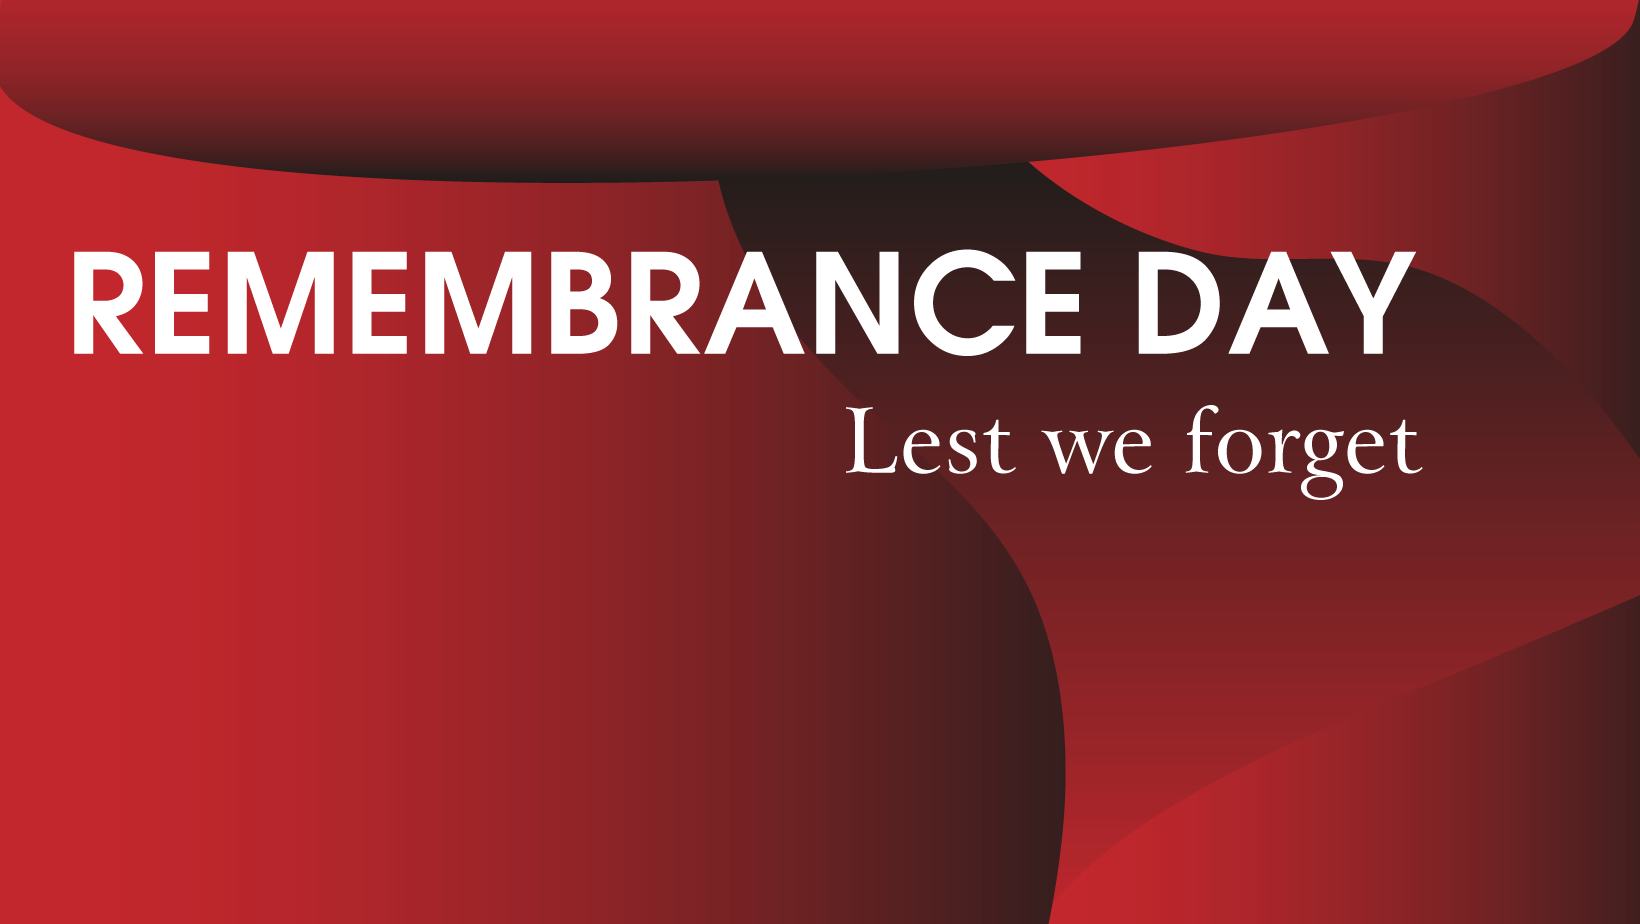 Remembrance Day - Lest we forget